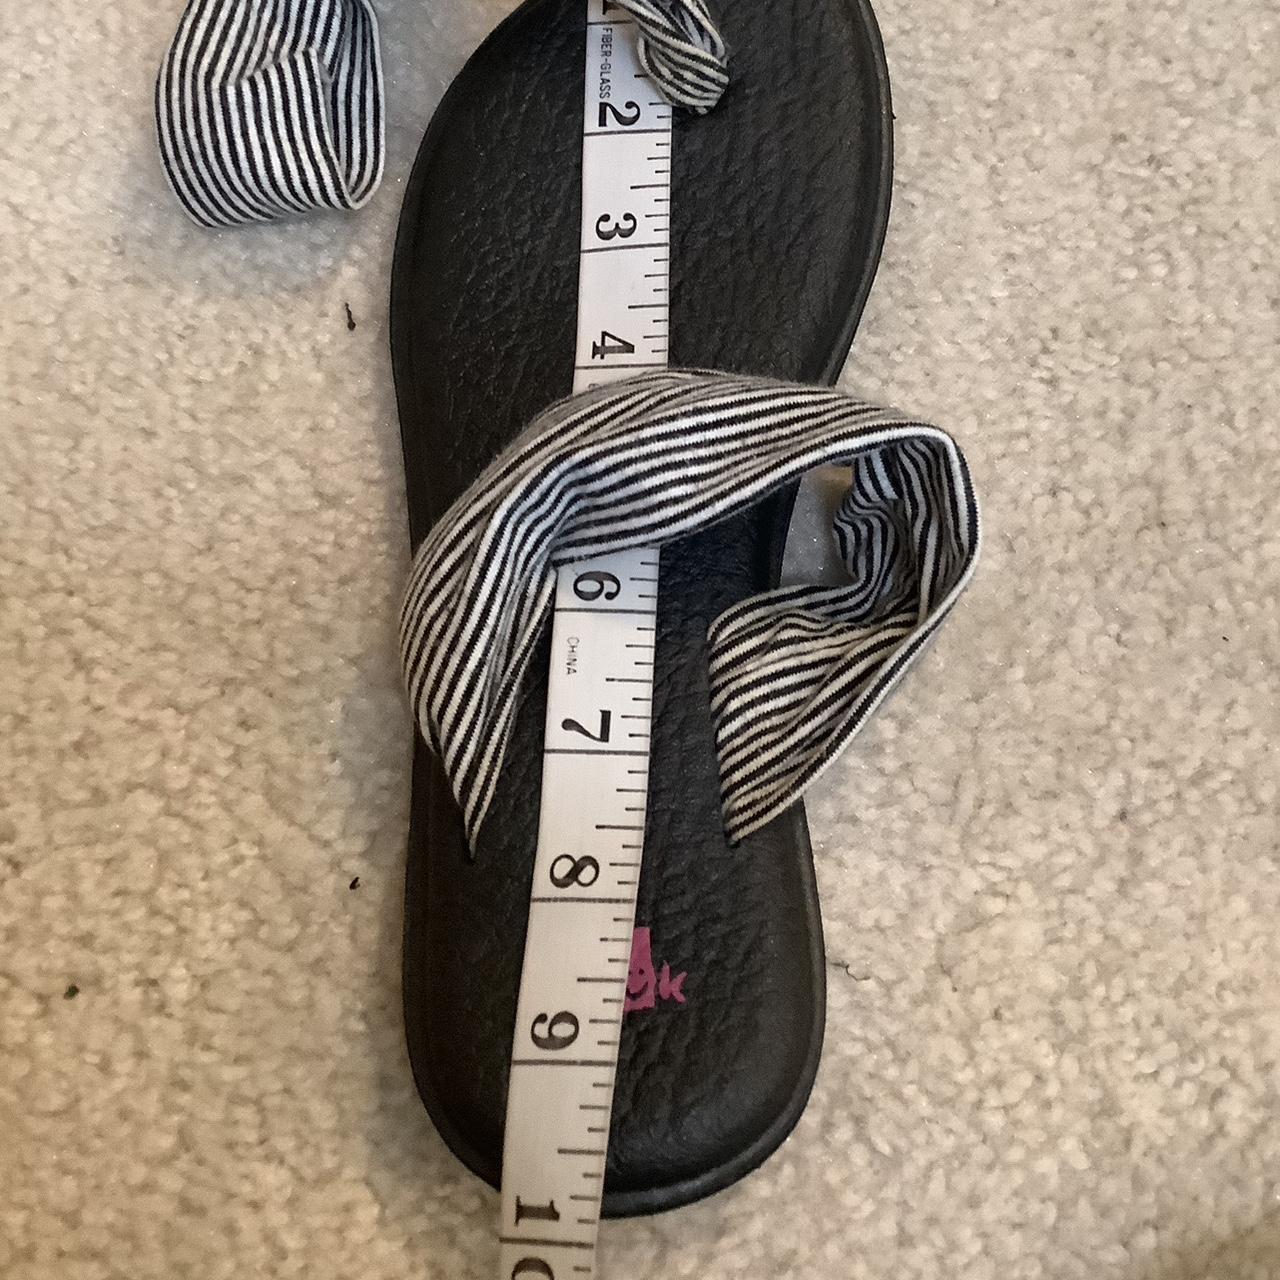 Sanuk Sandals Size 10, but they fit more like a - Depop